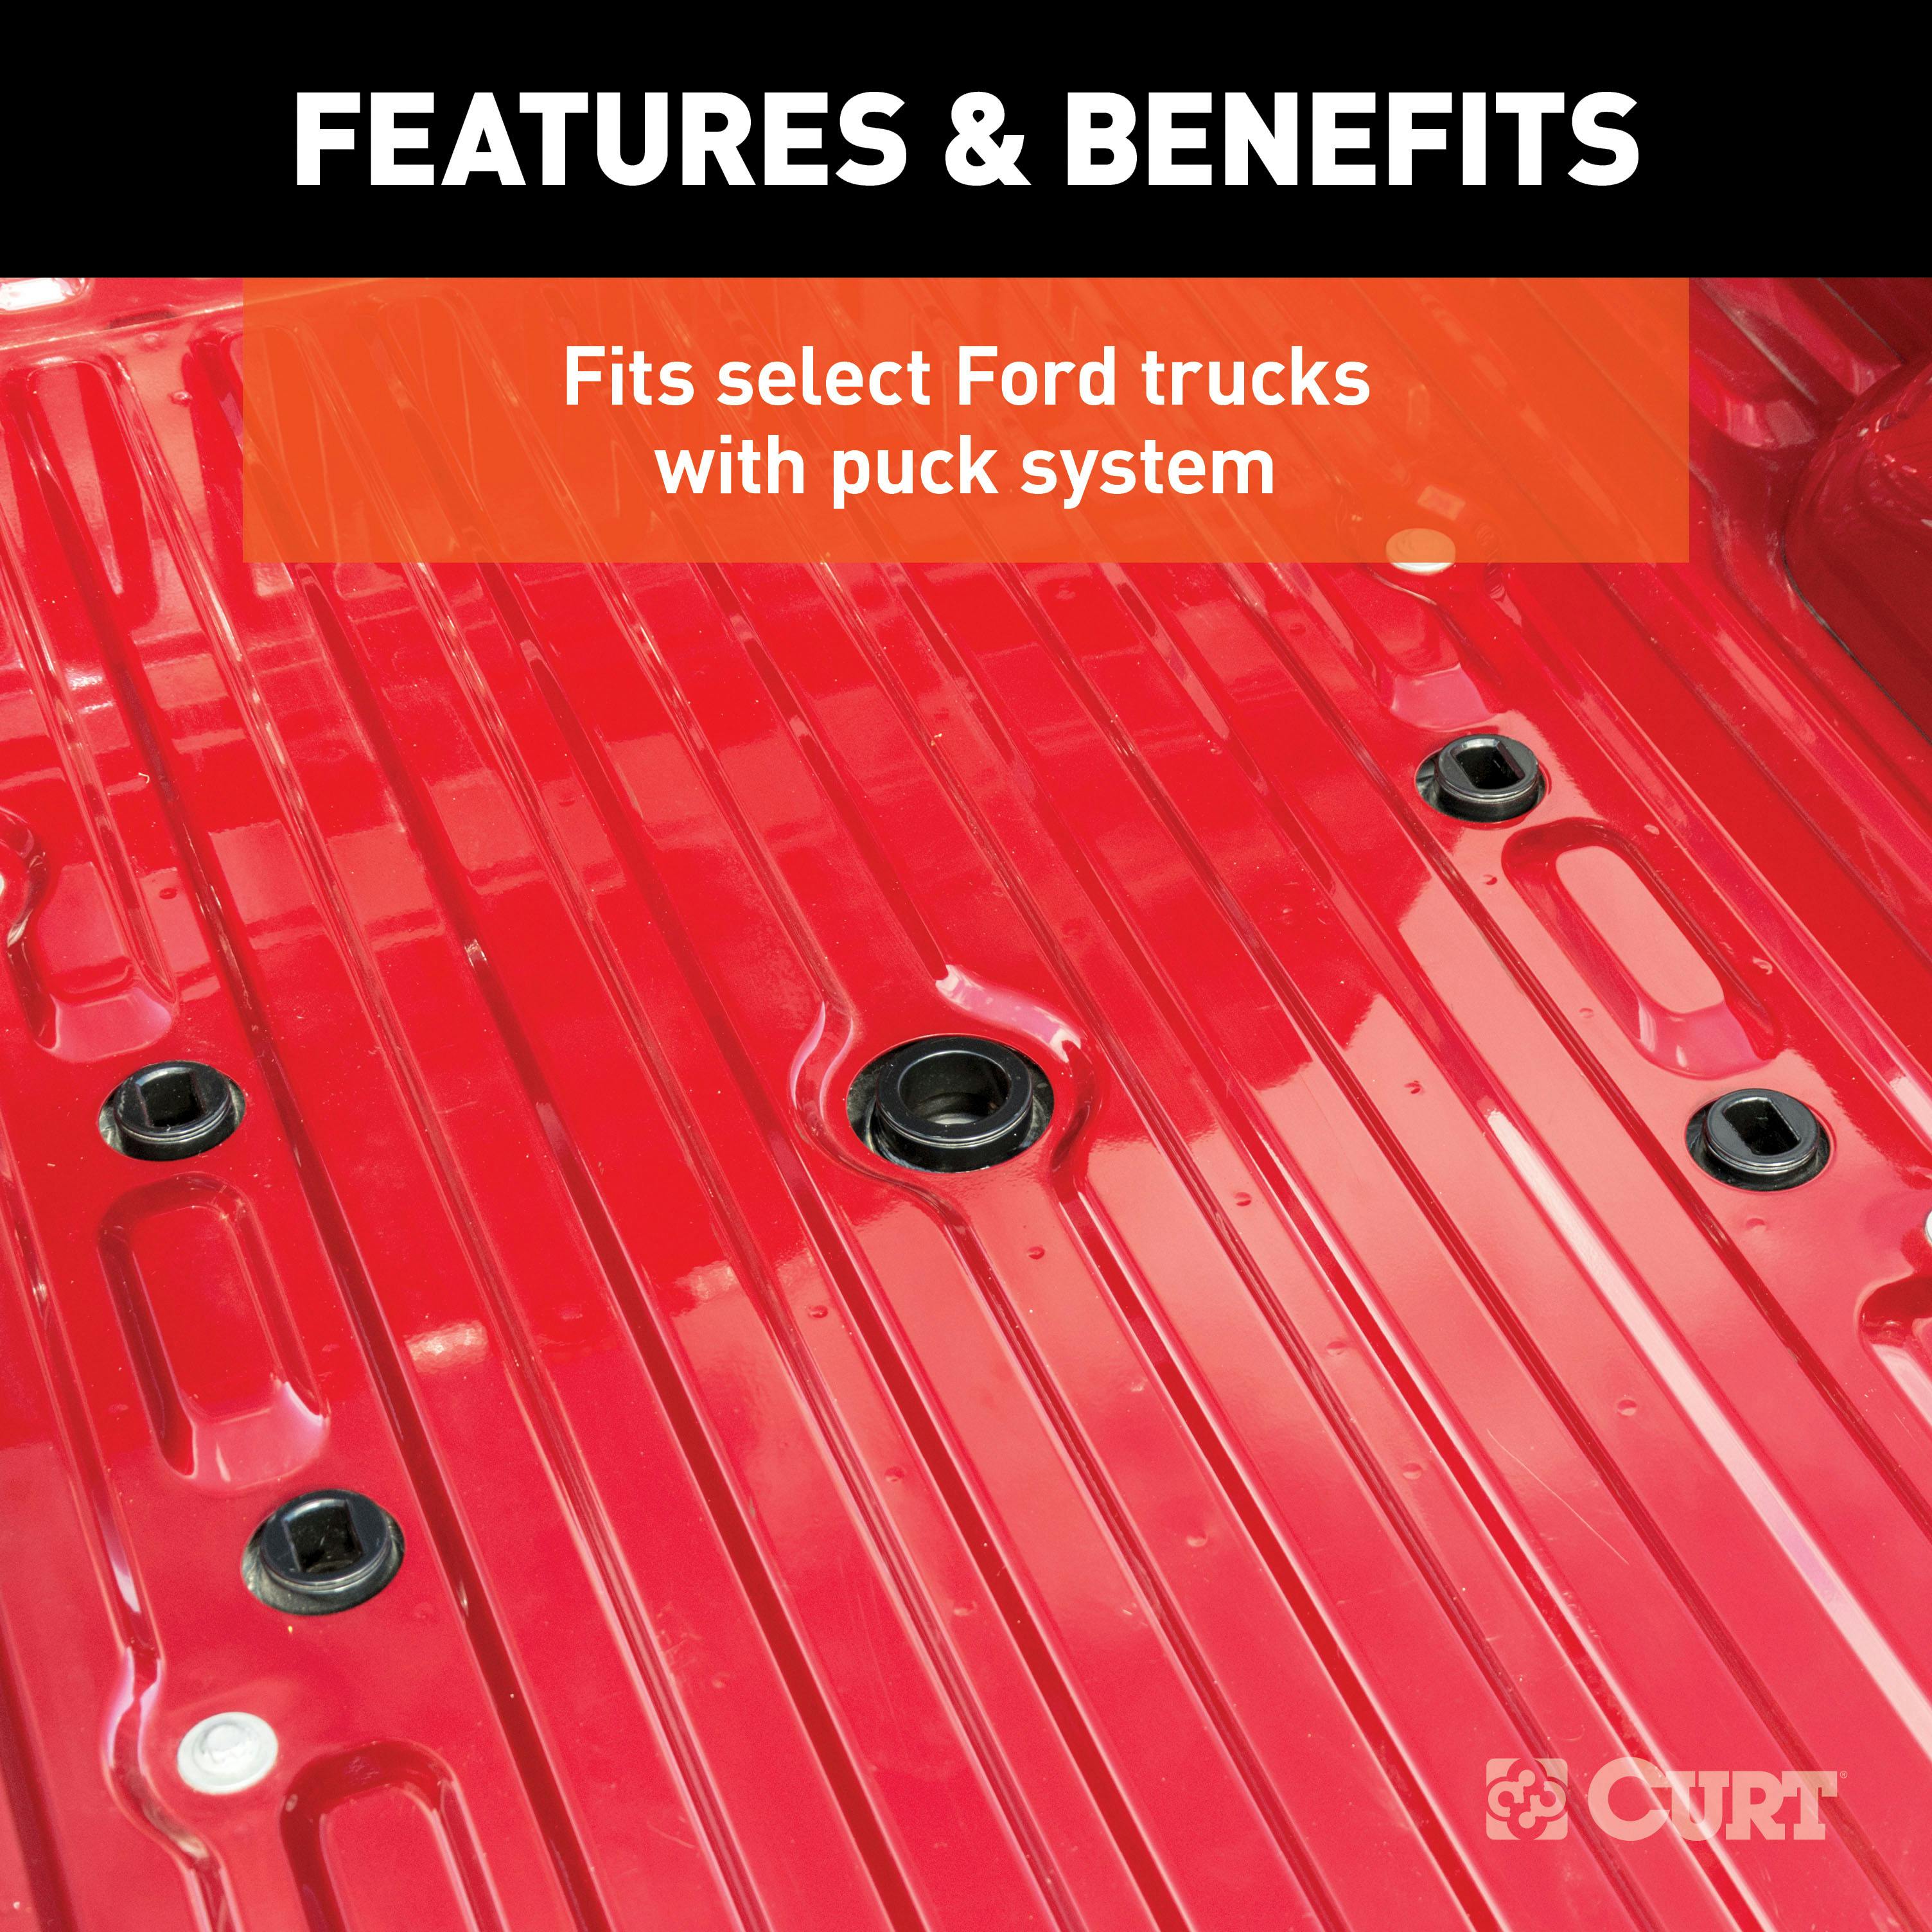 Short Bed Trucks 16,000 lbs CURT 16674 E16 5th Wheel Slider Hitch for Ford Puck System 